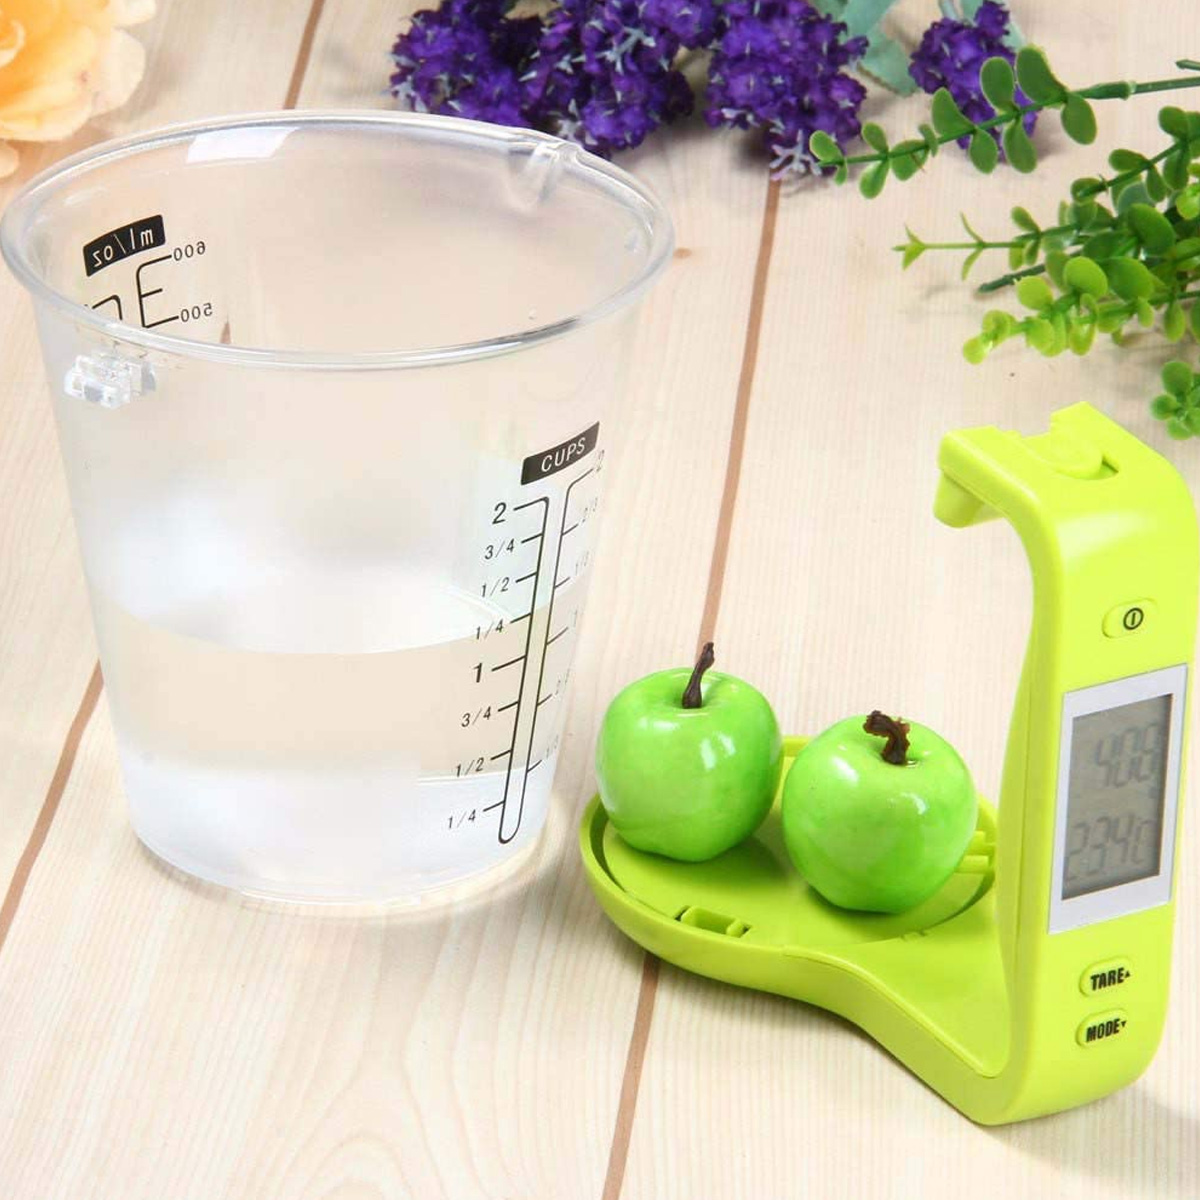 Electronic-Scale-Measuring-Cup-Auto-Power-Off-Electronic-Scale-Large-Capacity-LCD-Digital-Measuring--86136-8